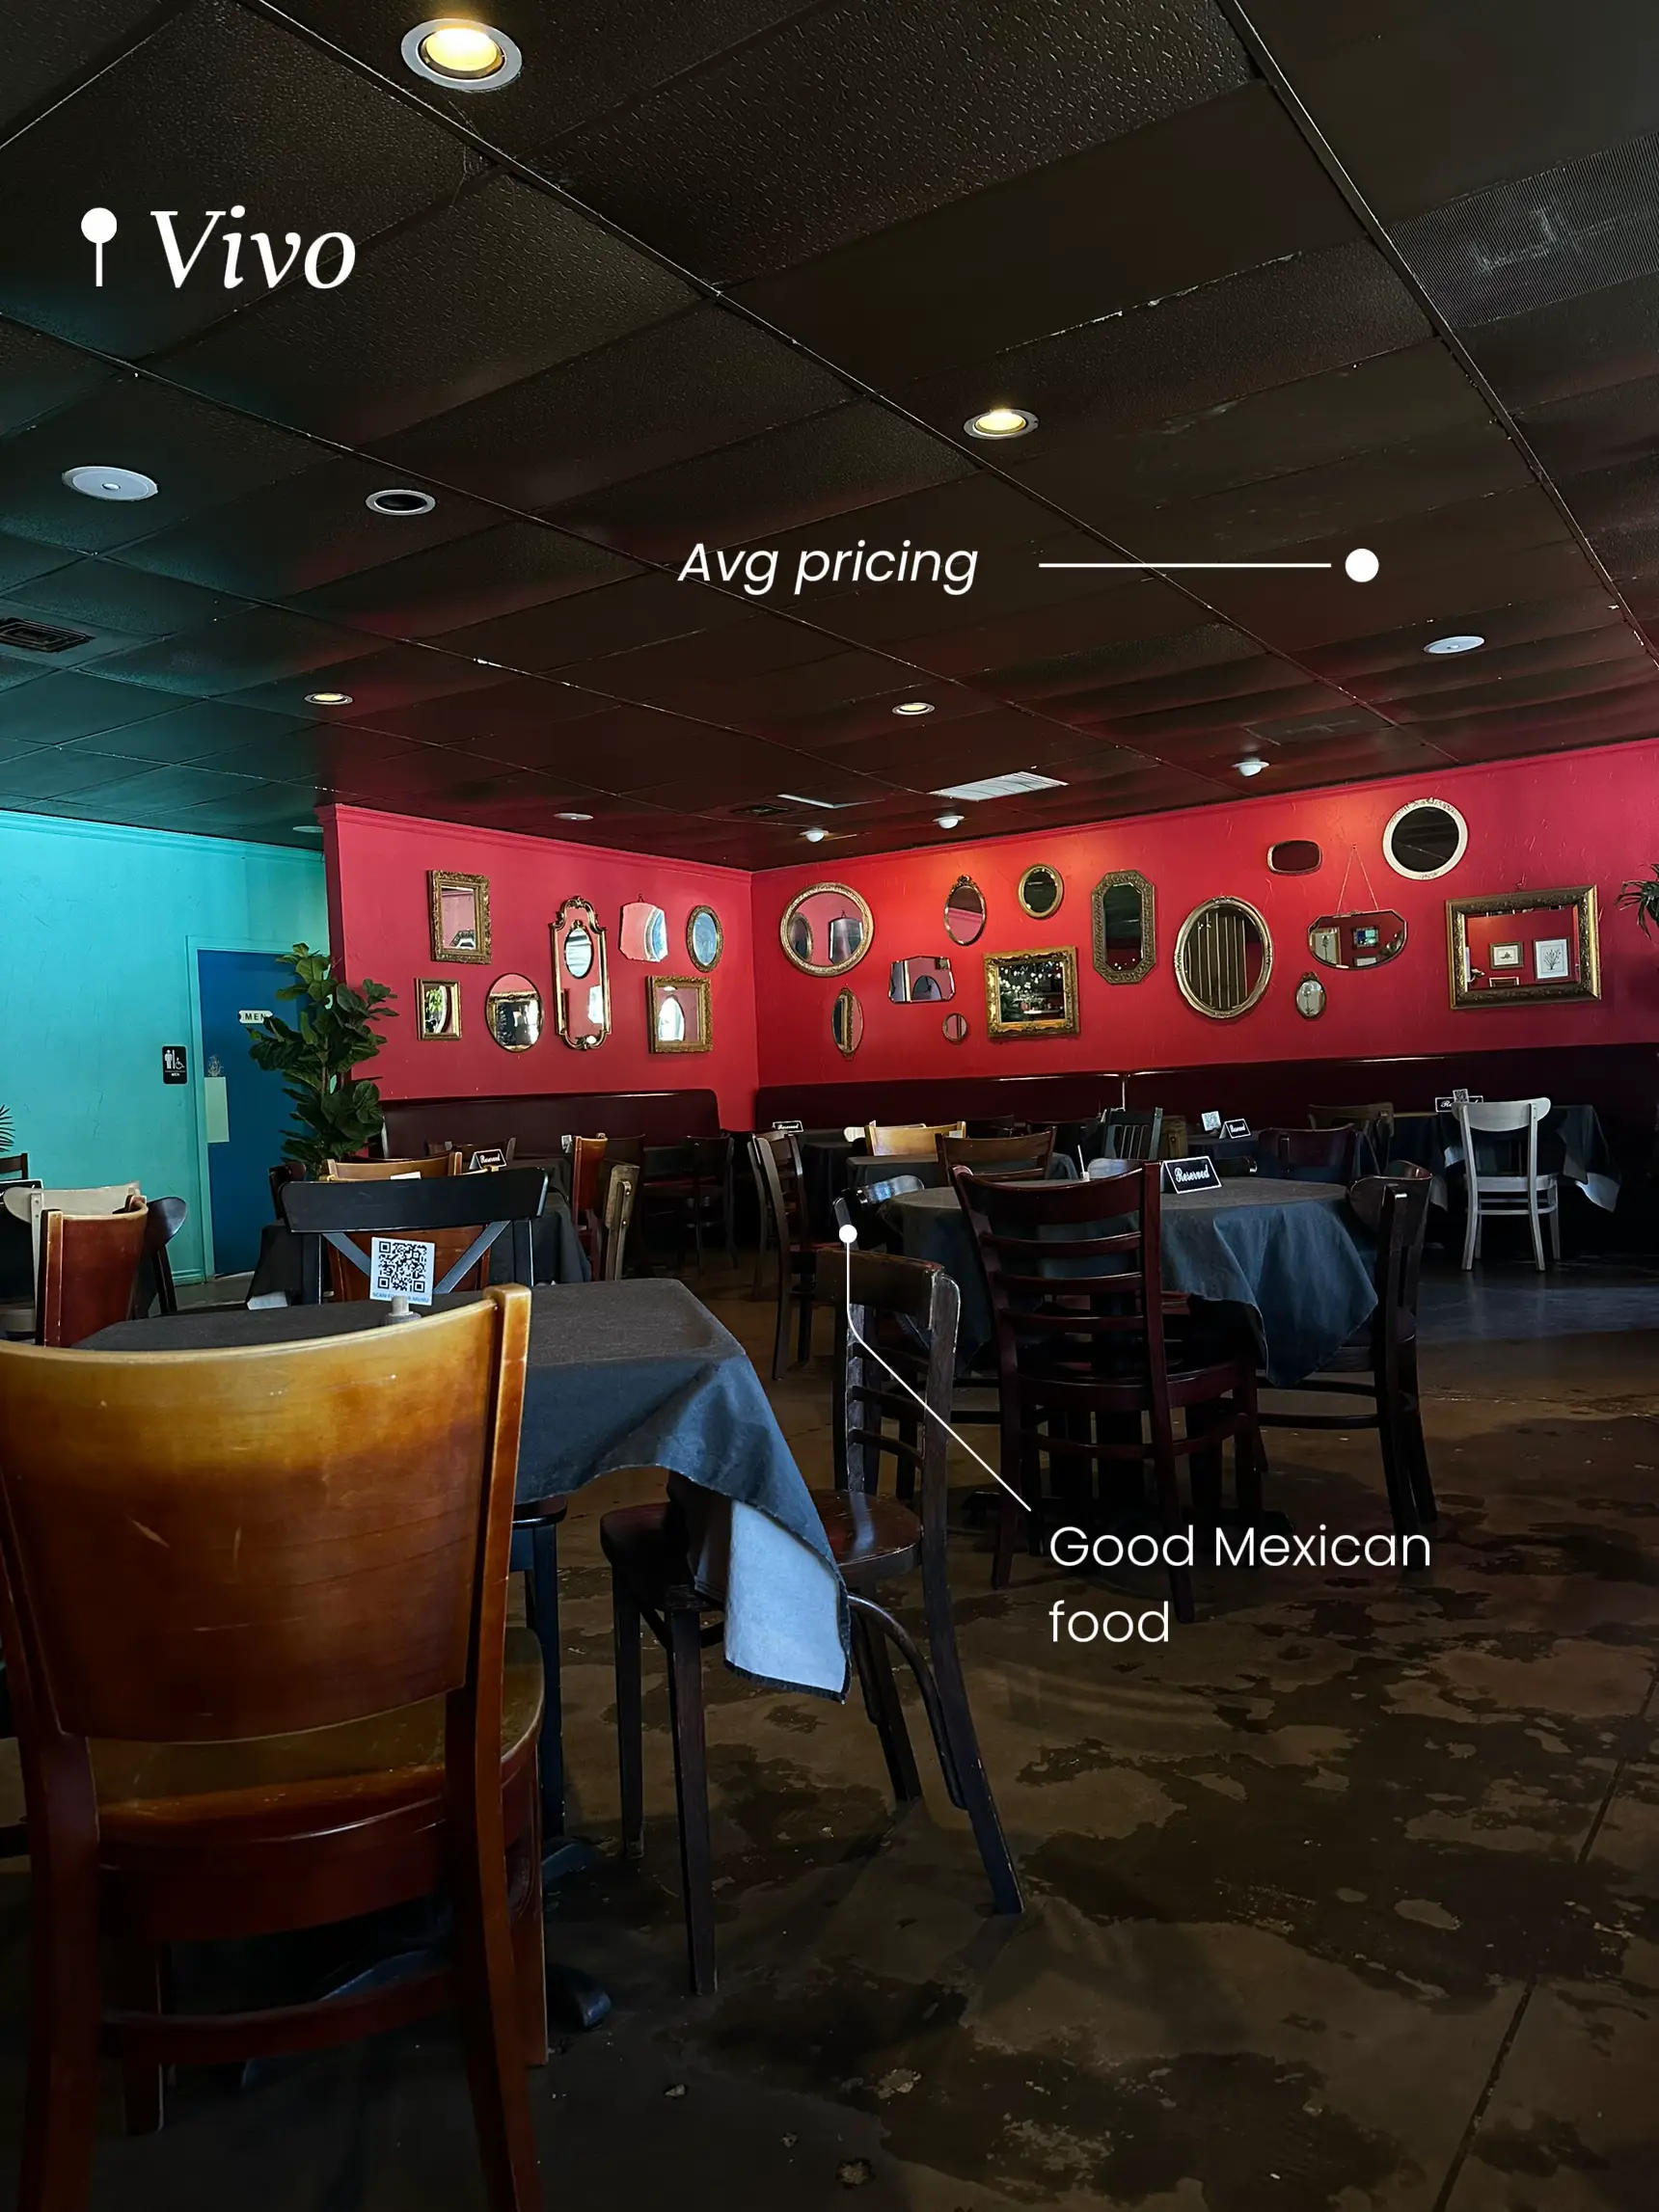  A restaurant with a red wall and a sign that says "Good Mexican food".